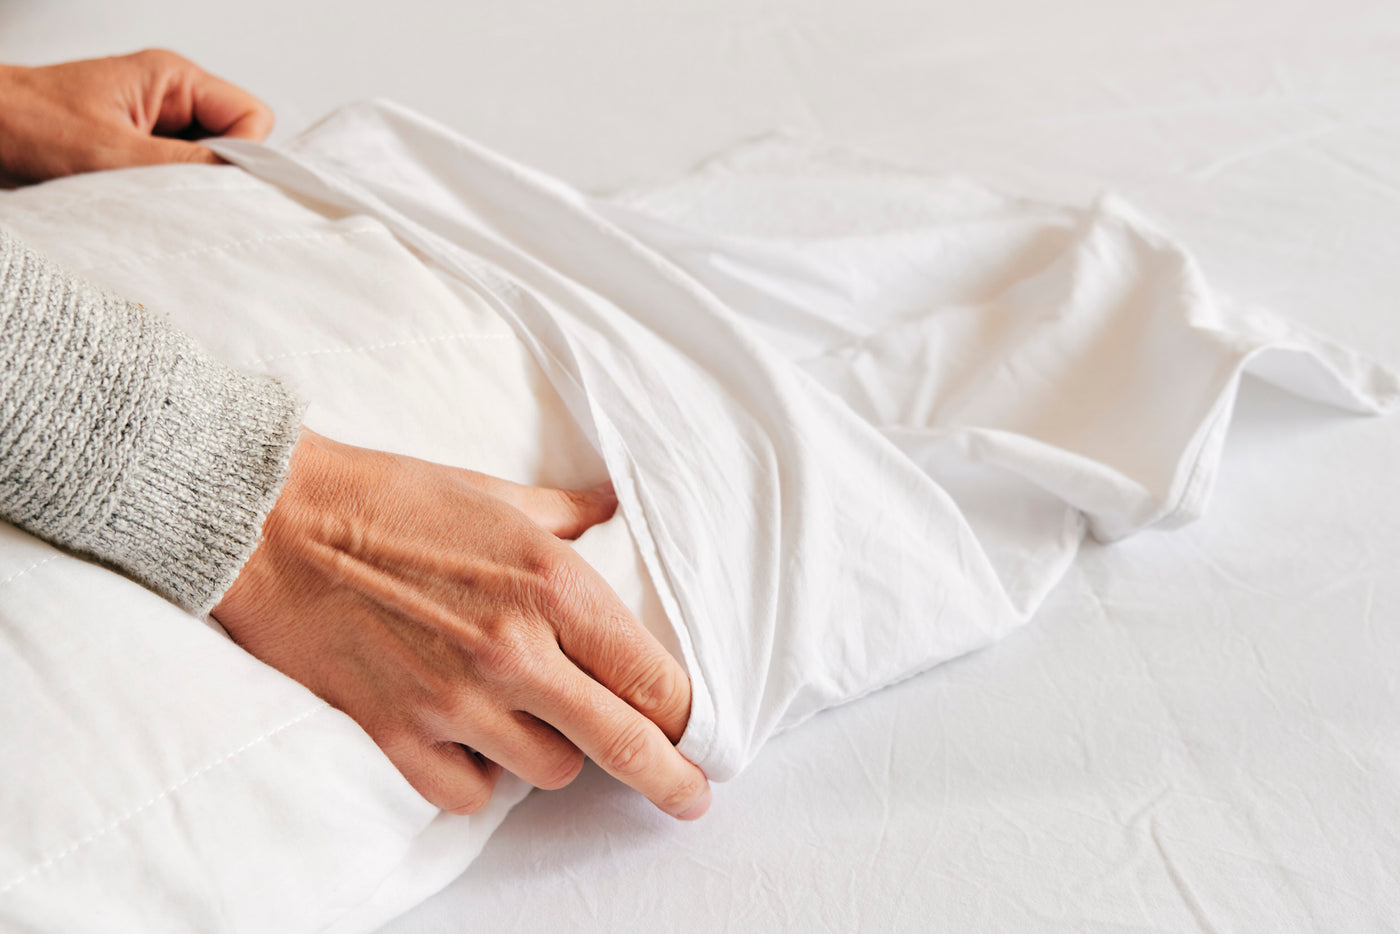 Image of a person's hands sliding a pillow into a white pillowcase on top of white sheets